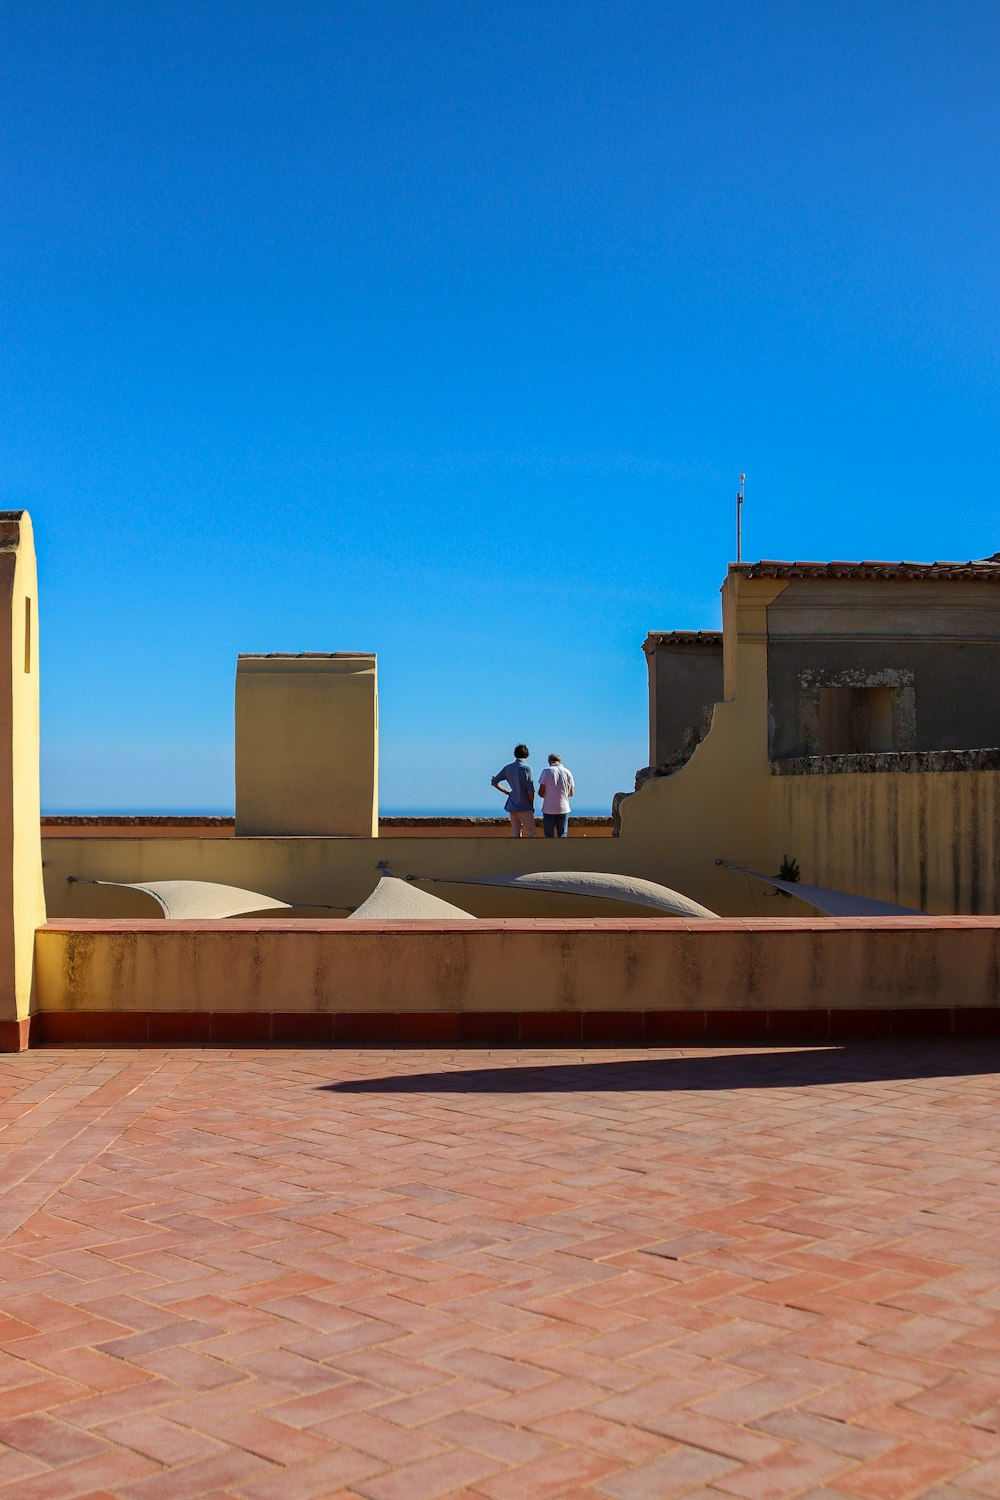 a man riding a skateboard on top of a roof